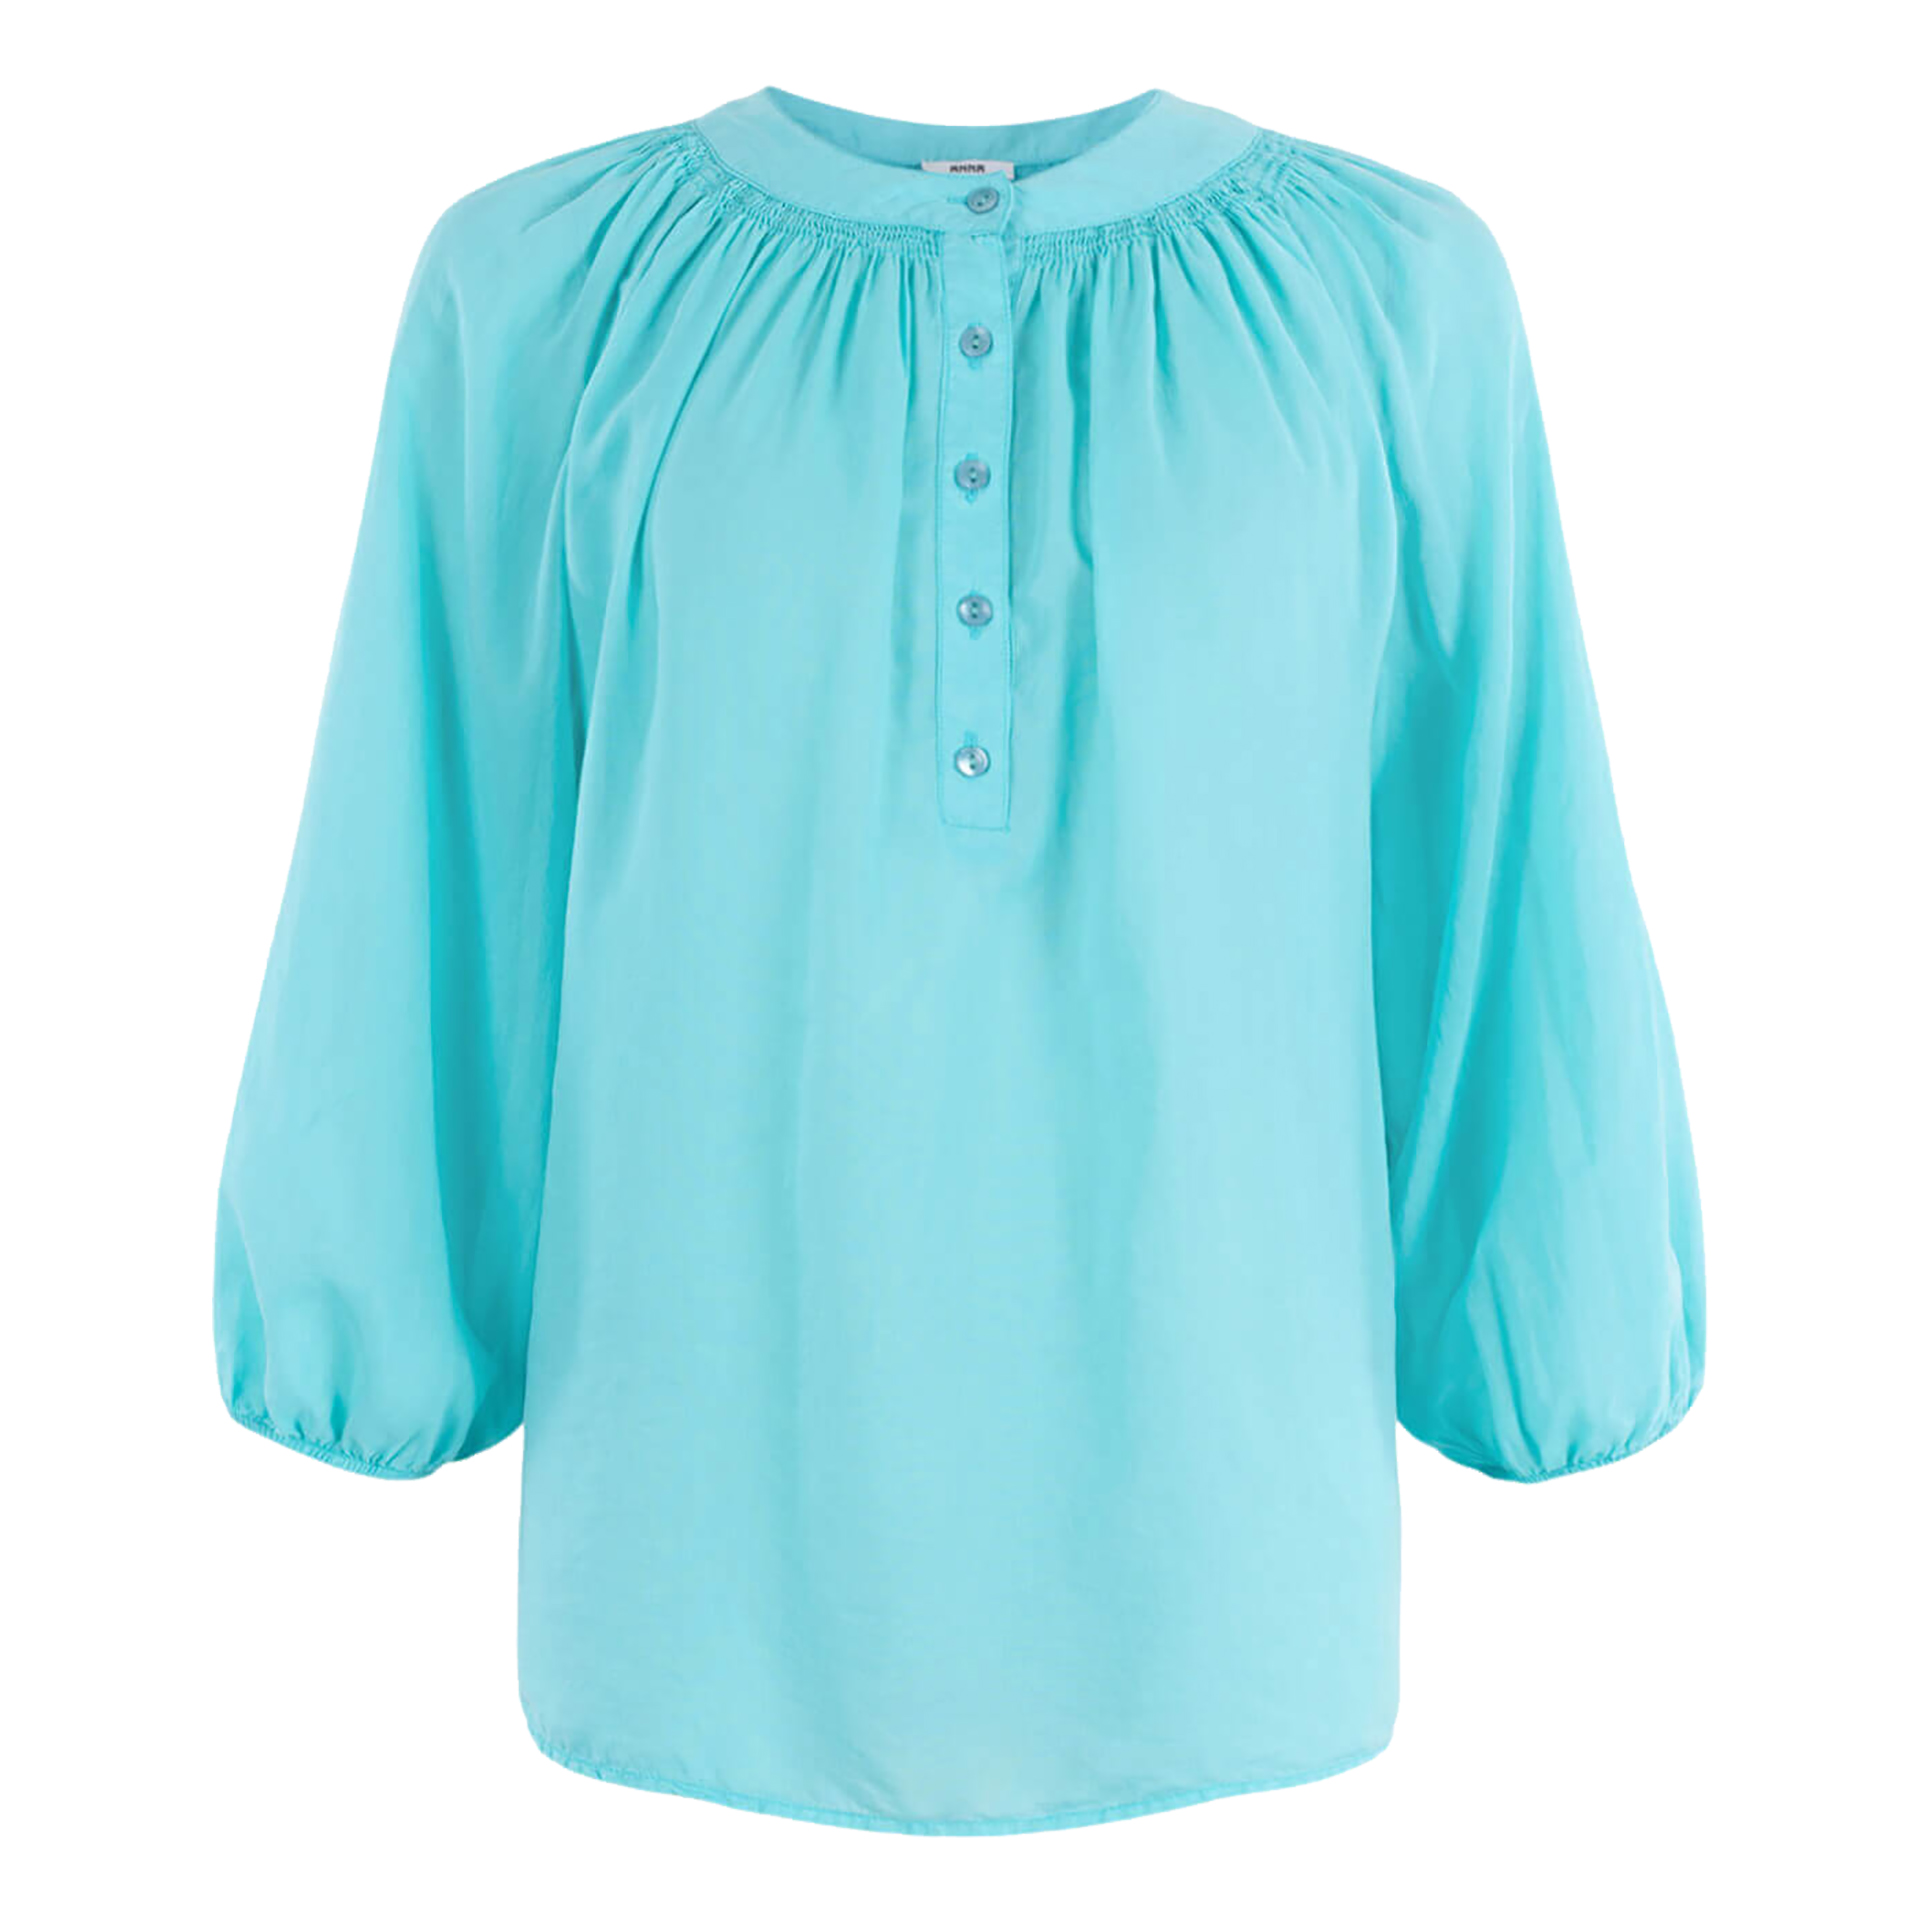 Blouse top